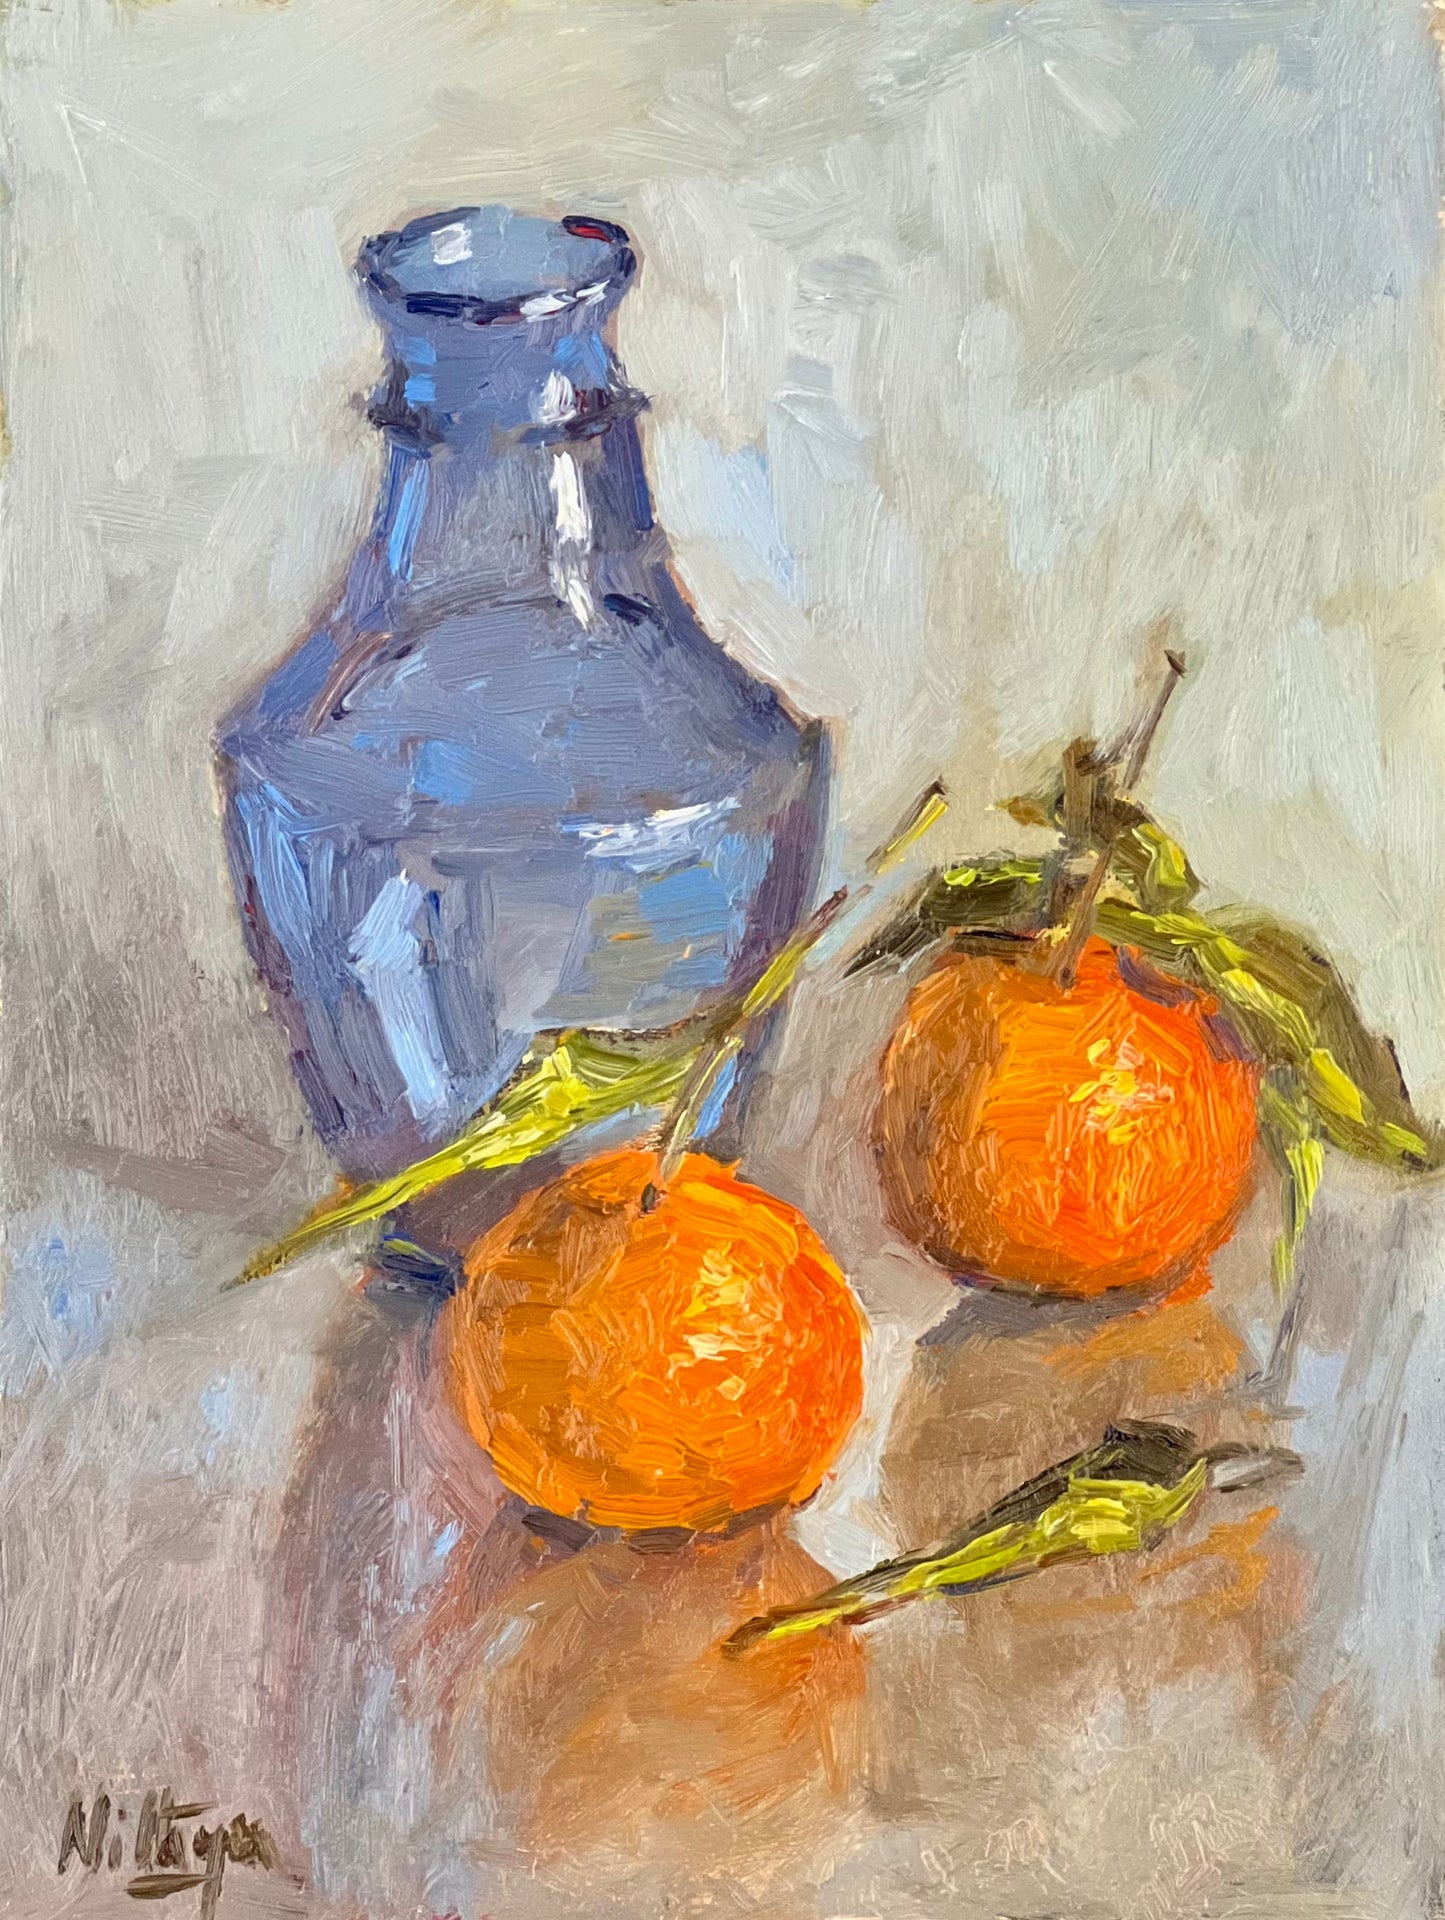 Small Oil Painting - Oranges and a blue glass!